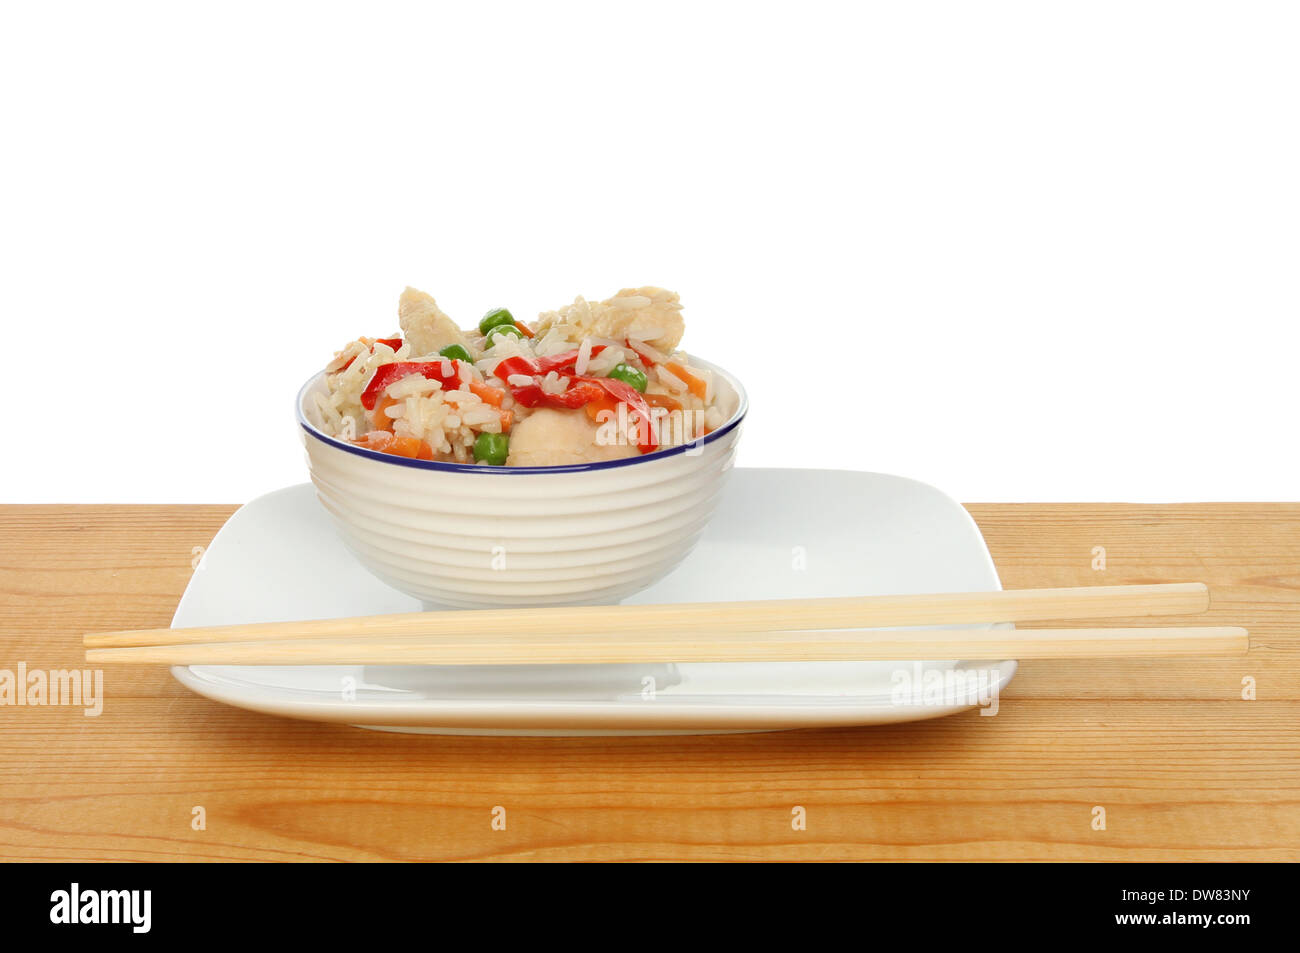 Chinese meal of chicken and vegetable rice in a bowl with chopsticks on a wooden table against a white background Stock Photo